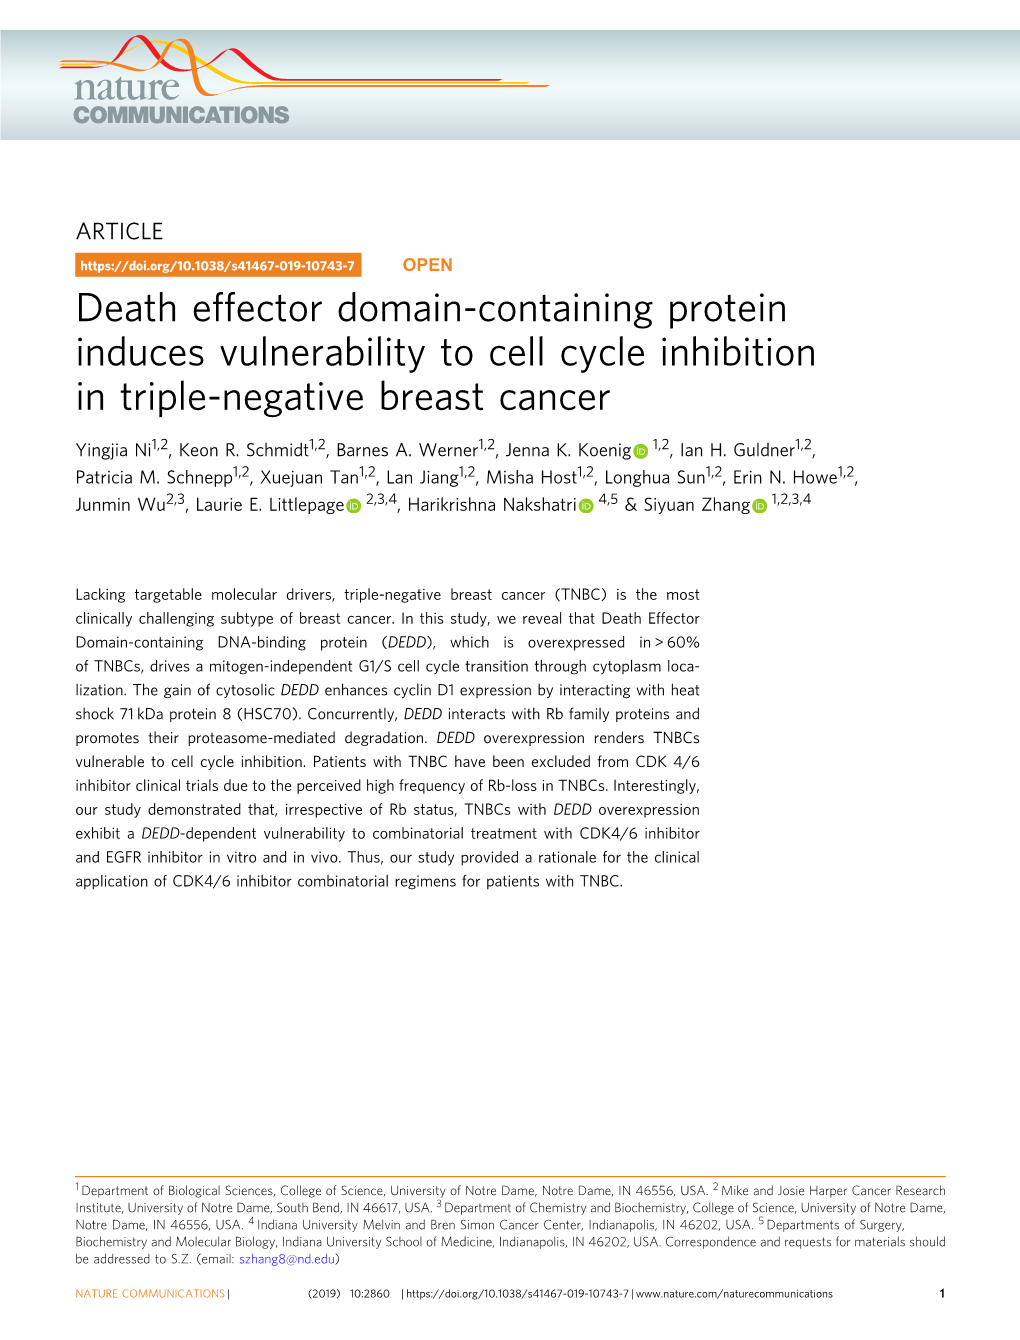 Death Effector Domain-Containing Protein Induces Vulnerability to Cell Cycle Inhibition in Triple-Negative Breast Cancer